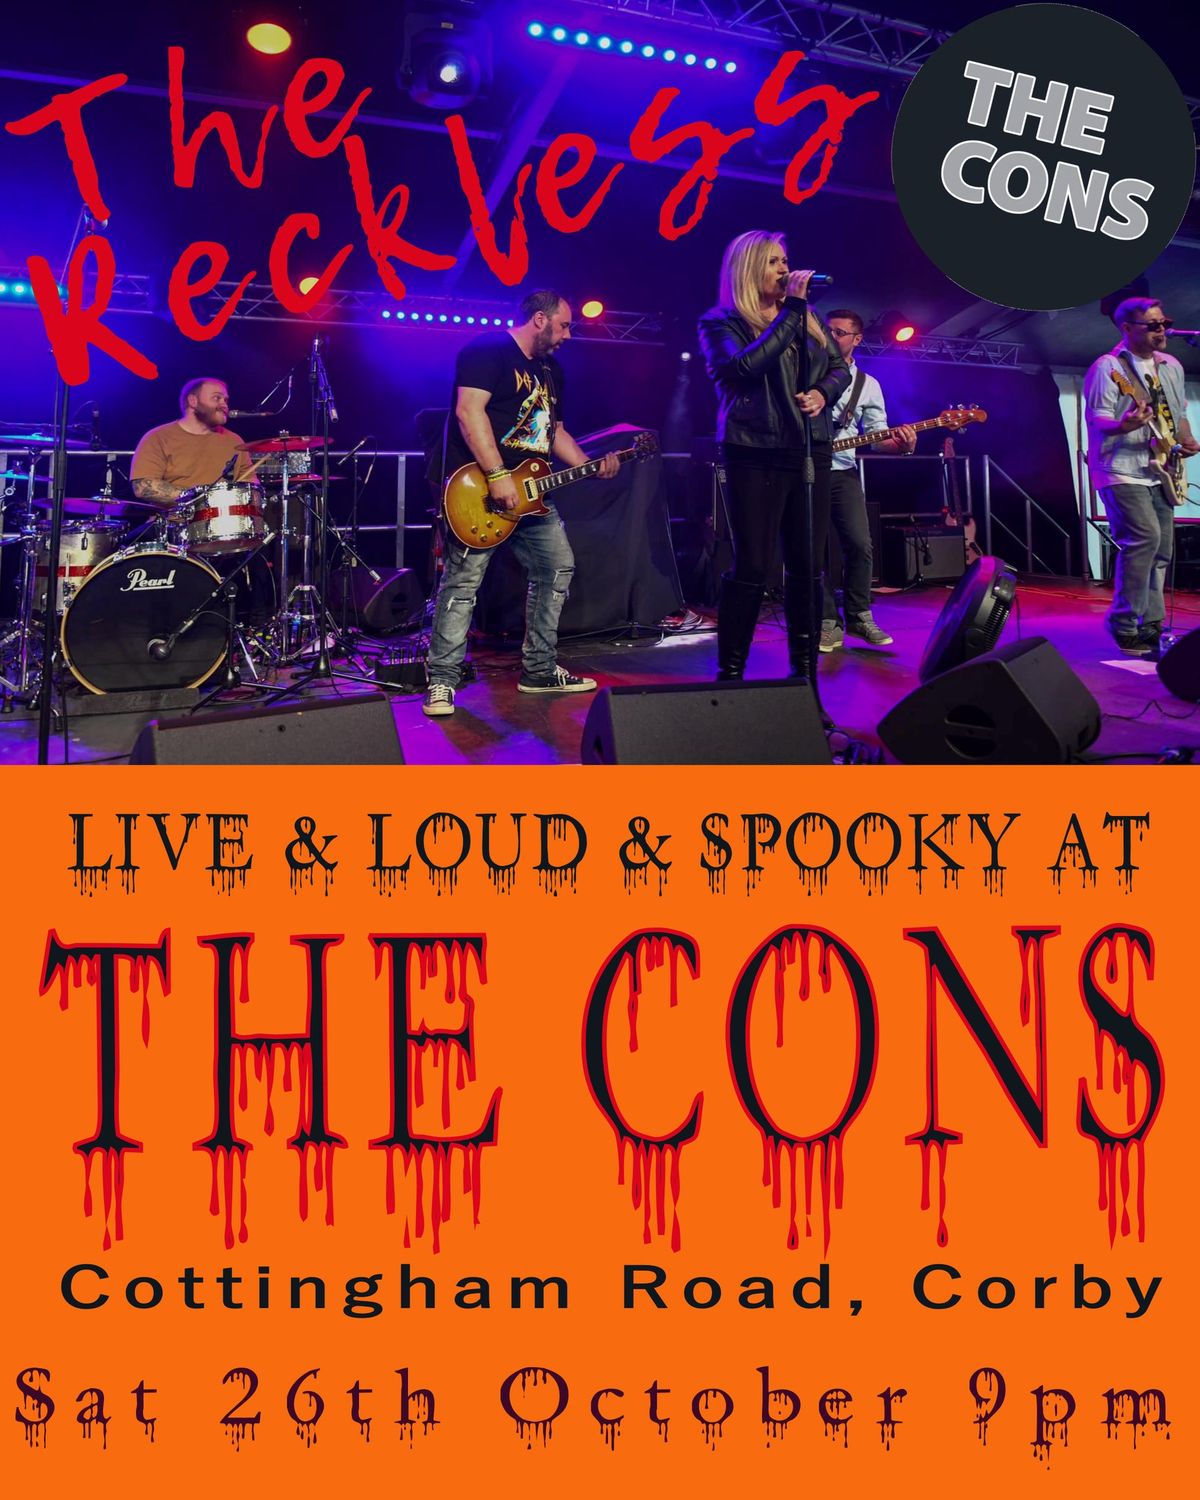 The Reckless -  live @ Corby Cons Club